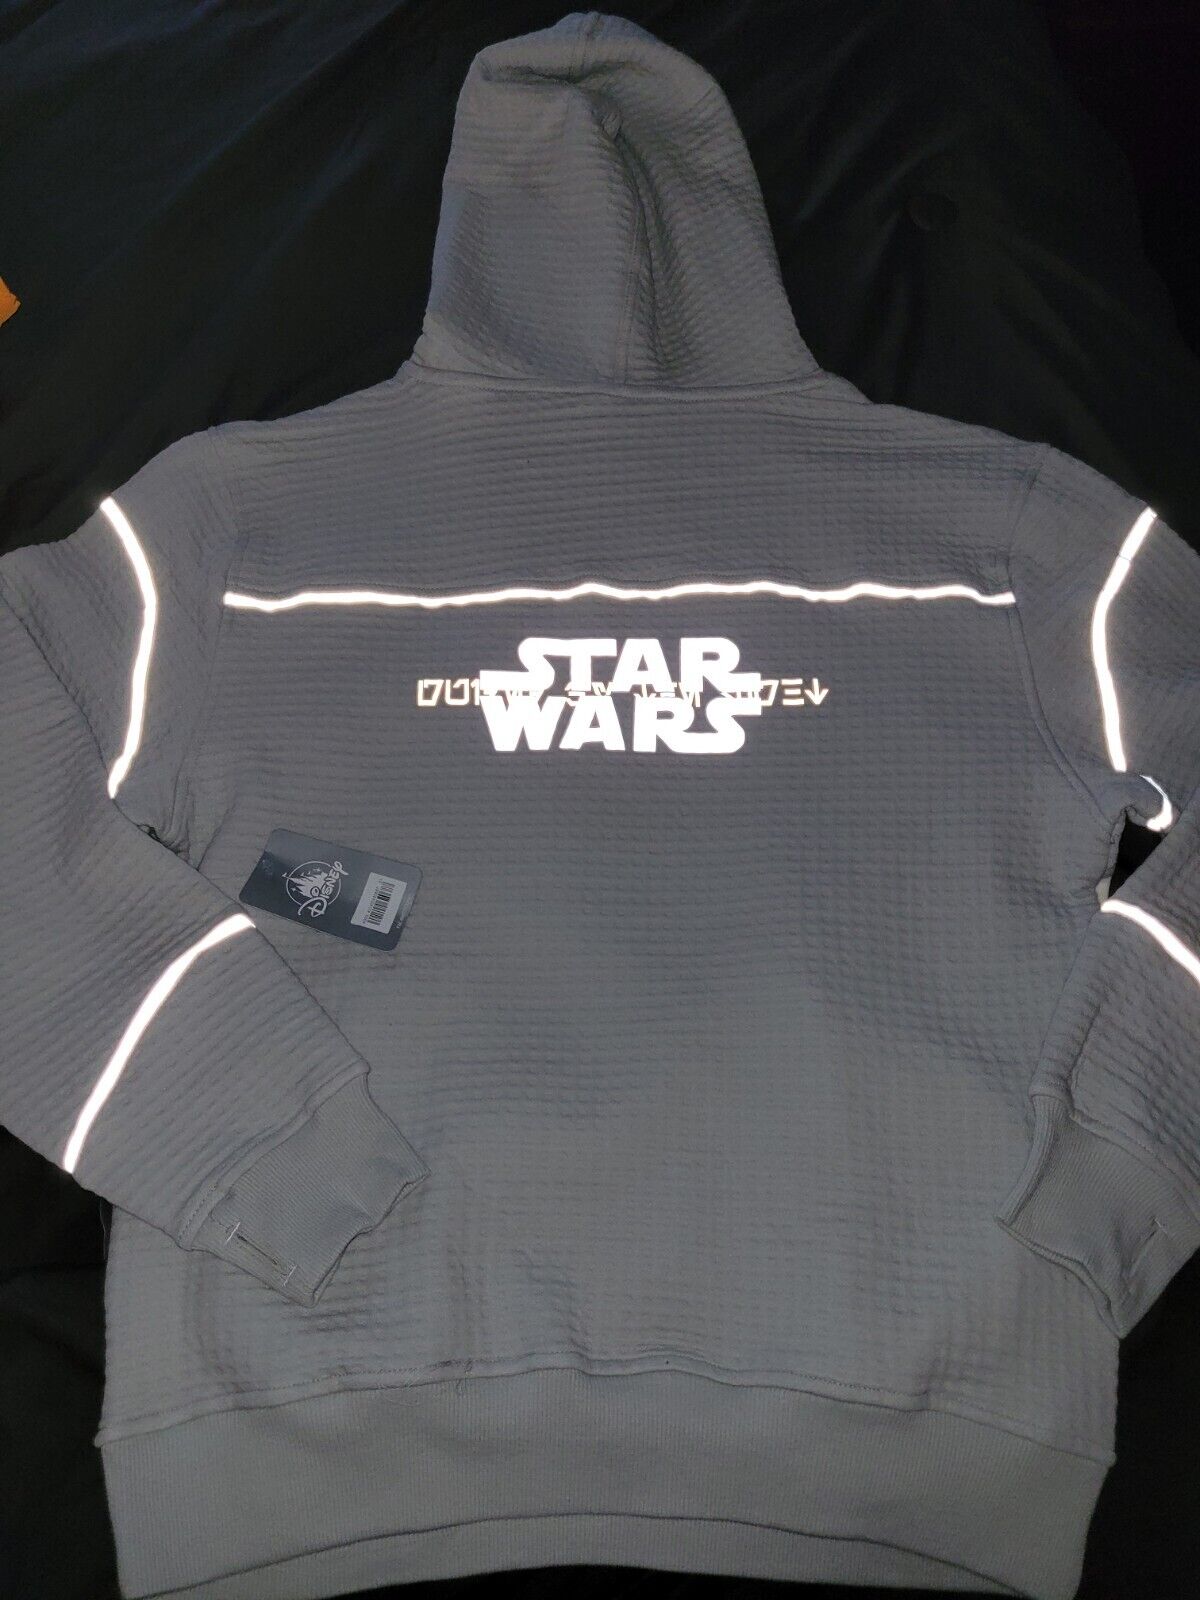 D23 expo Disney Star Wars reflective hoodie ashley eckstein guided by light smal